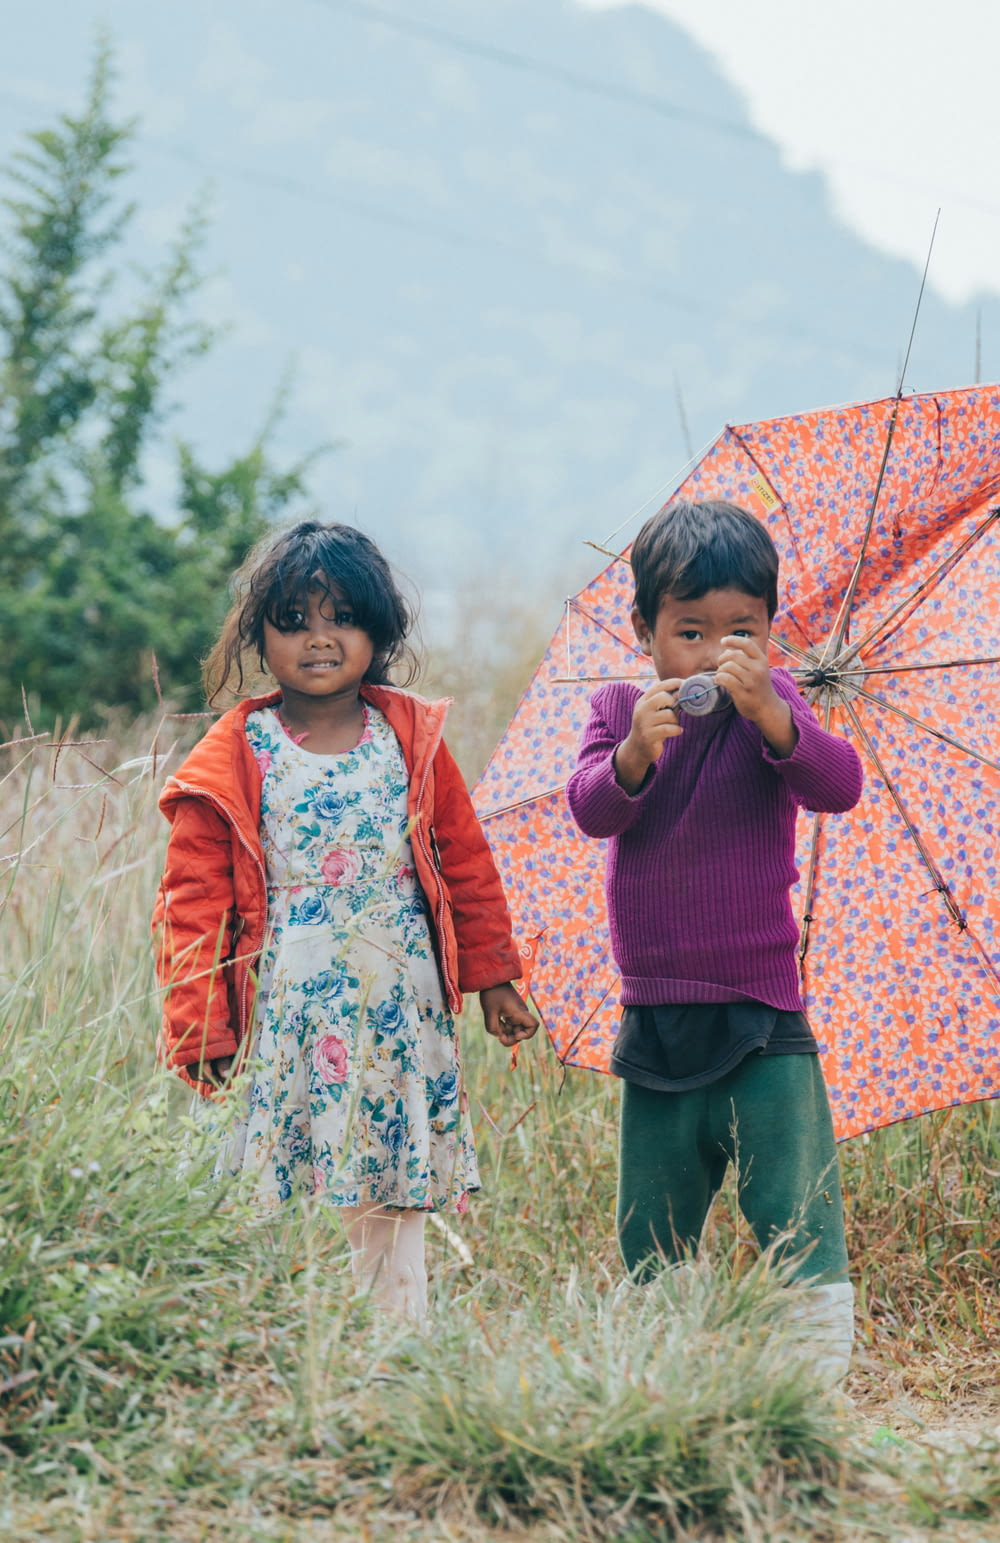 two little girls standing in a field holding umbrellas